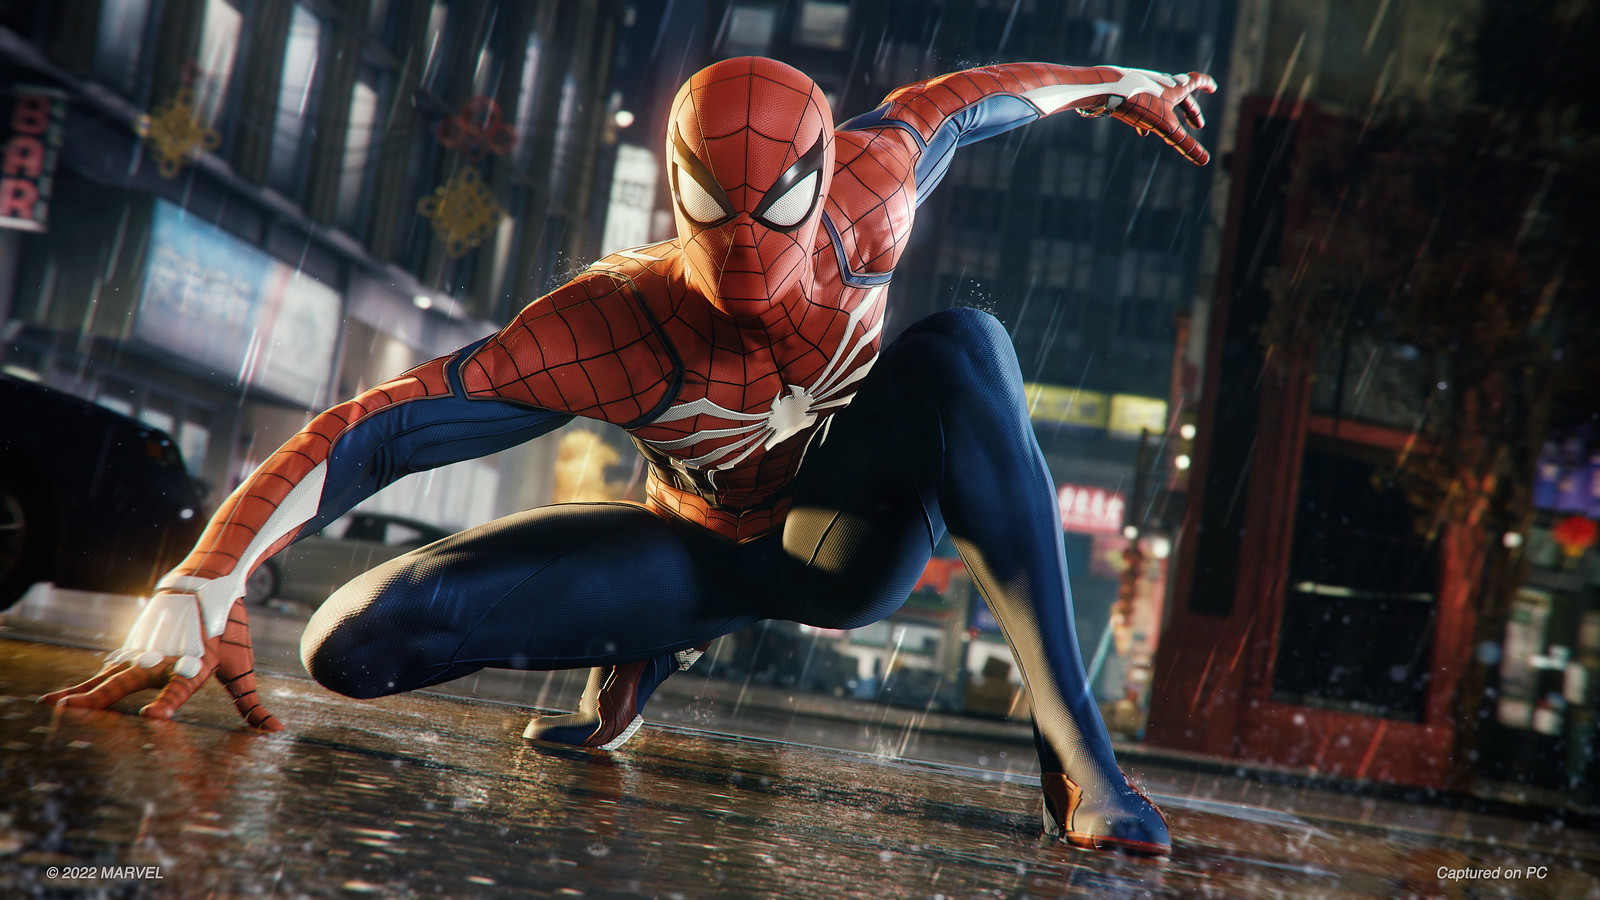 Marvel's Spider-Man PC system requirements unveiled: Intel Core i5-4160 and  Nvidia GeForce GTX 950 sufficient for a 720p 30 FPS experience -   News